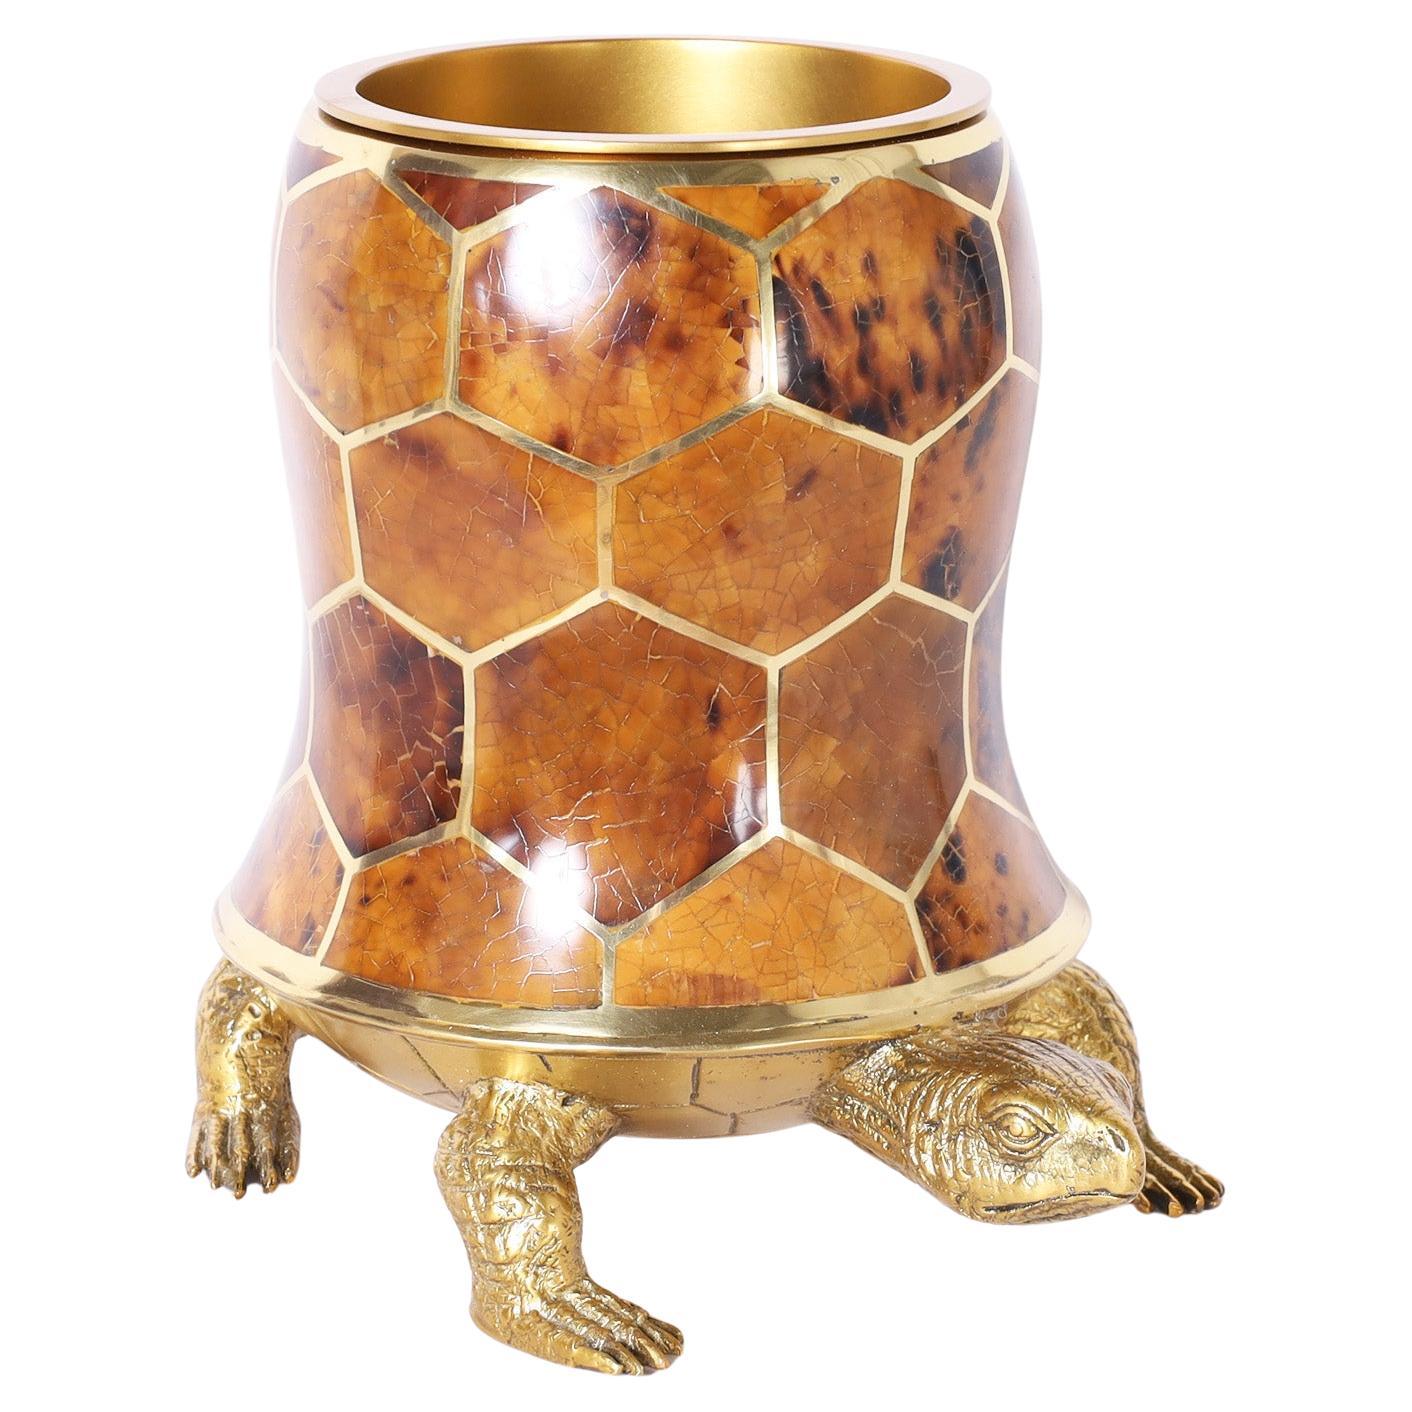 Bronze & Tortoise Shell Wine Cooler by Maitland-Smith